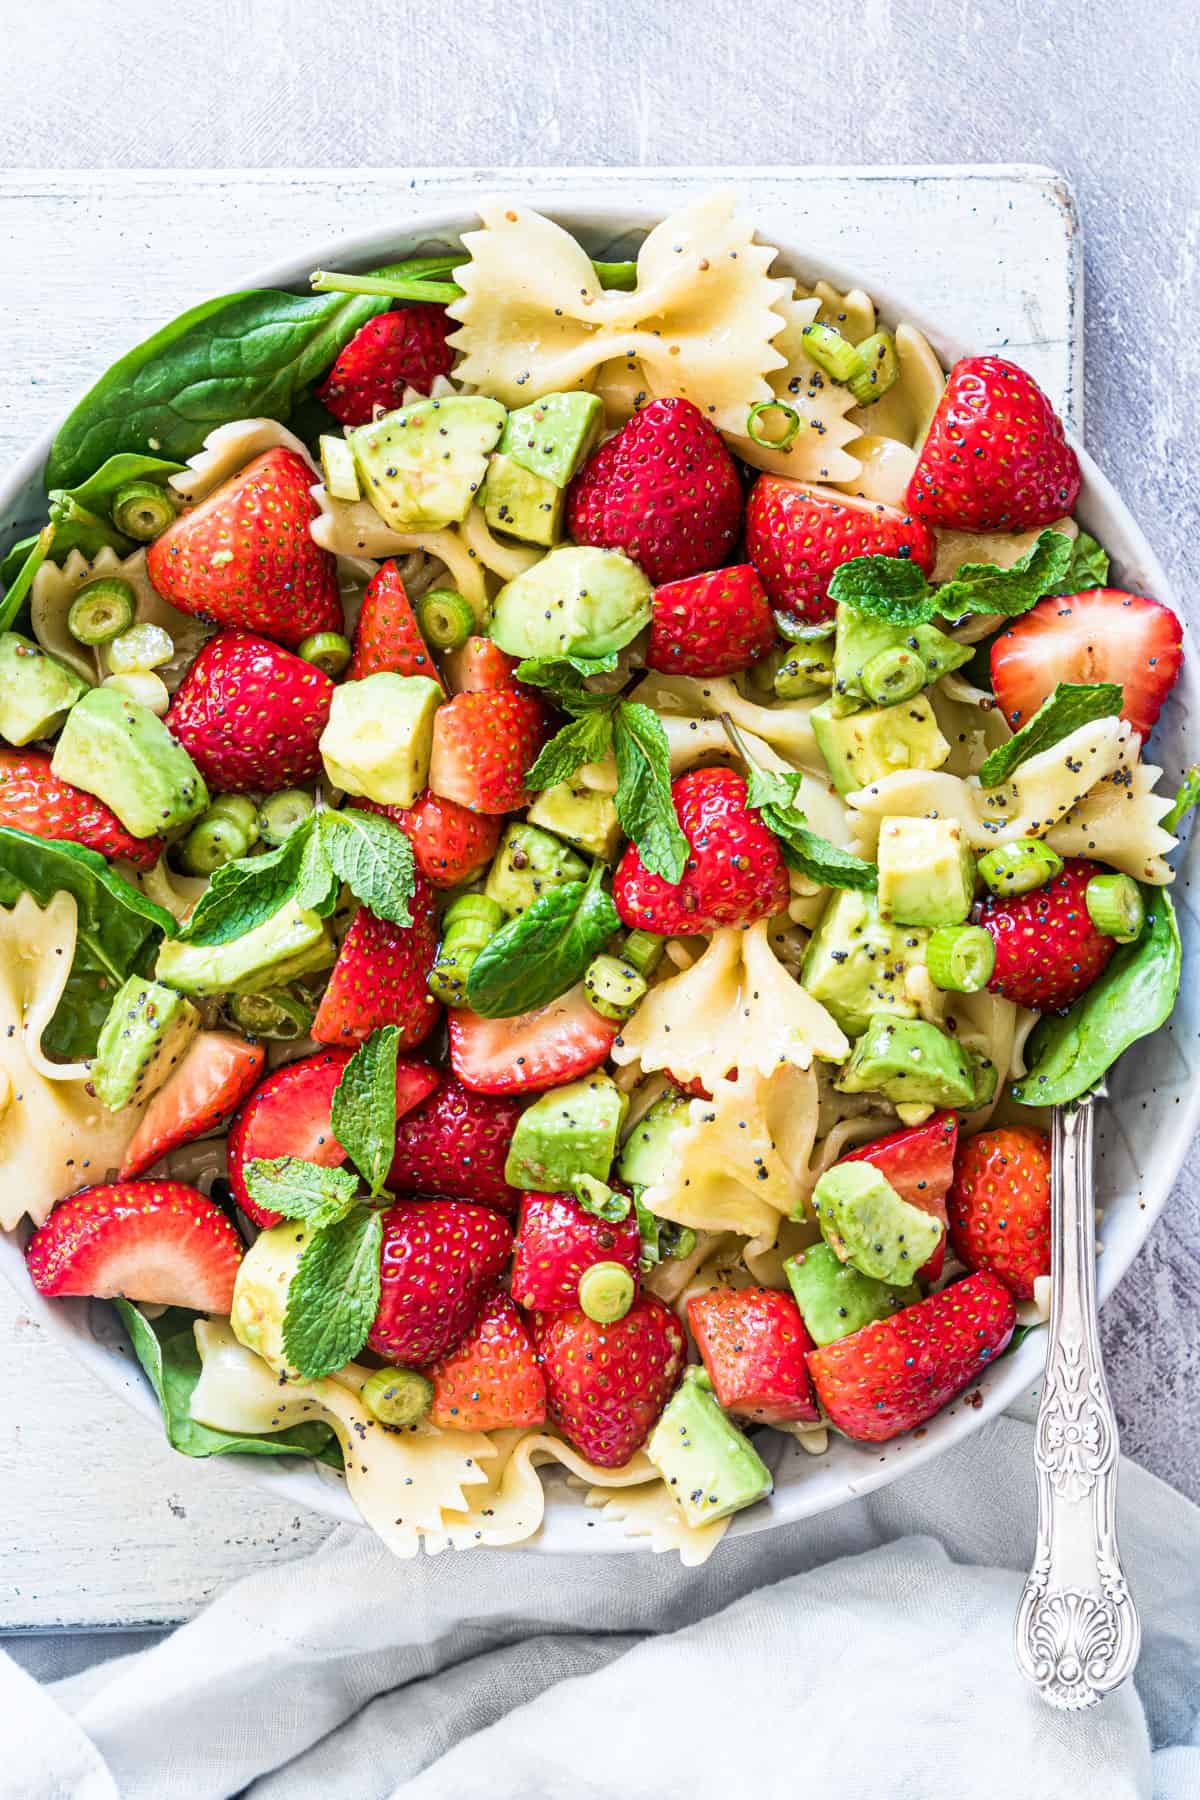 strawberry avocado pasta salad in bowl on counter with spoon and napkin.